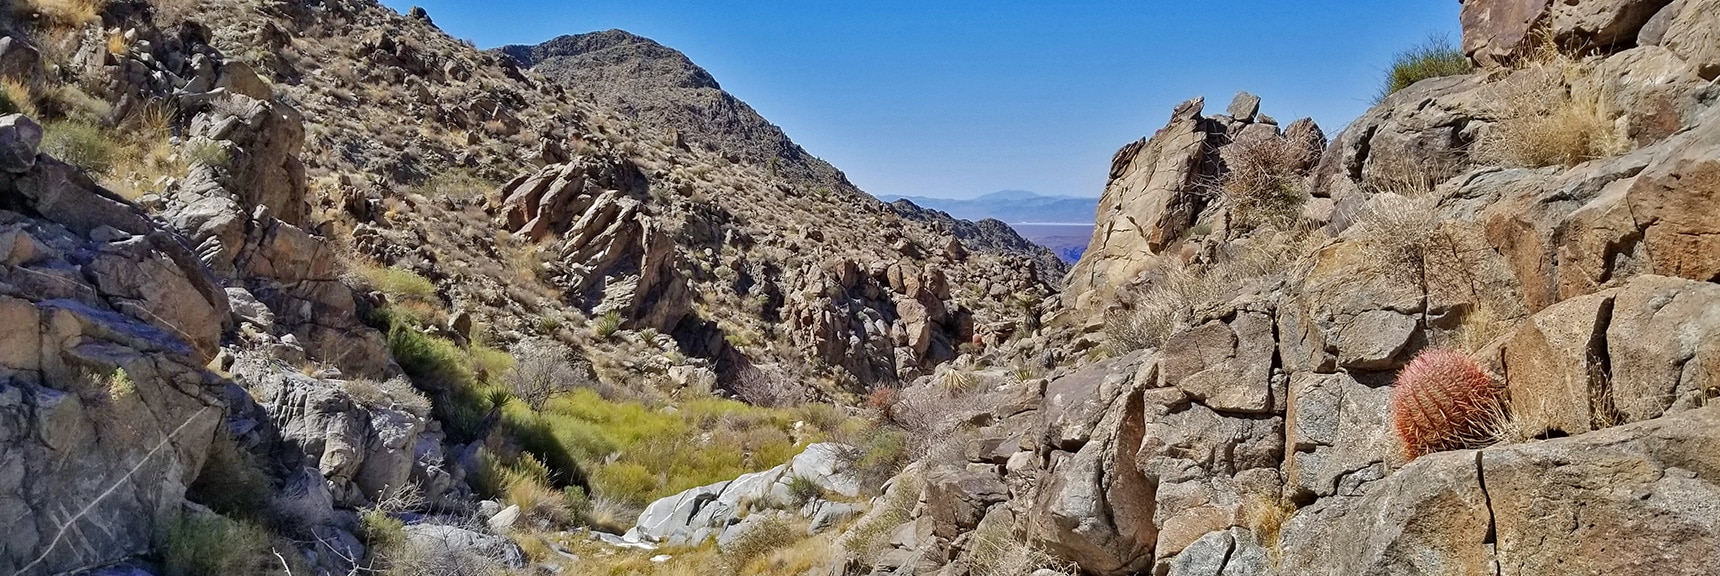 View Down Upper Horse Thief Canyon to Lake Mead and Beyond. | Horse Thief Canyon Loop | Mt. Wilson | Black Mountains | Lake Mead National Recreation Area, Arizona